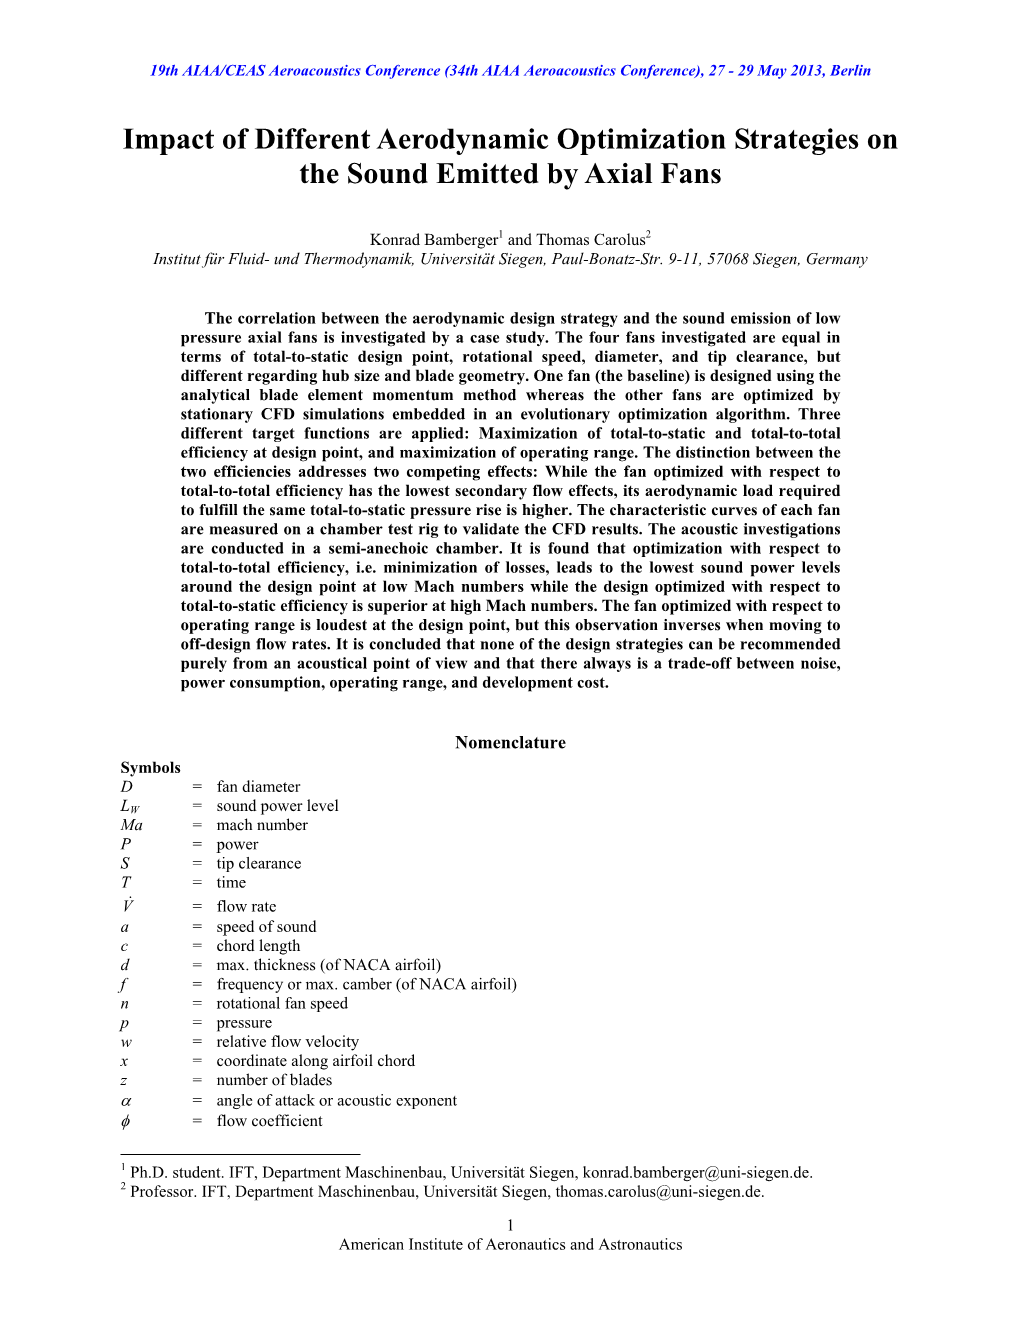 Impact of Different Aerodynamic Optimization Strategies on the Sound Emitted by Axial Fans